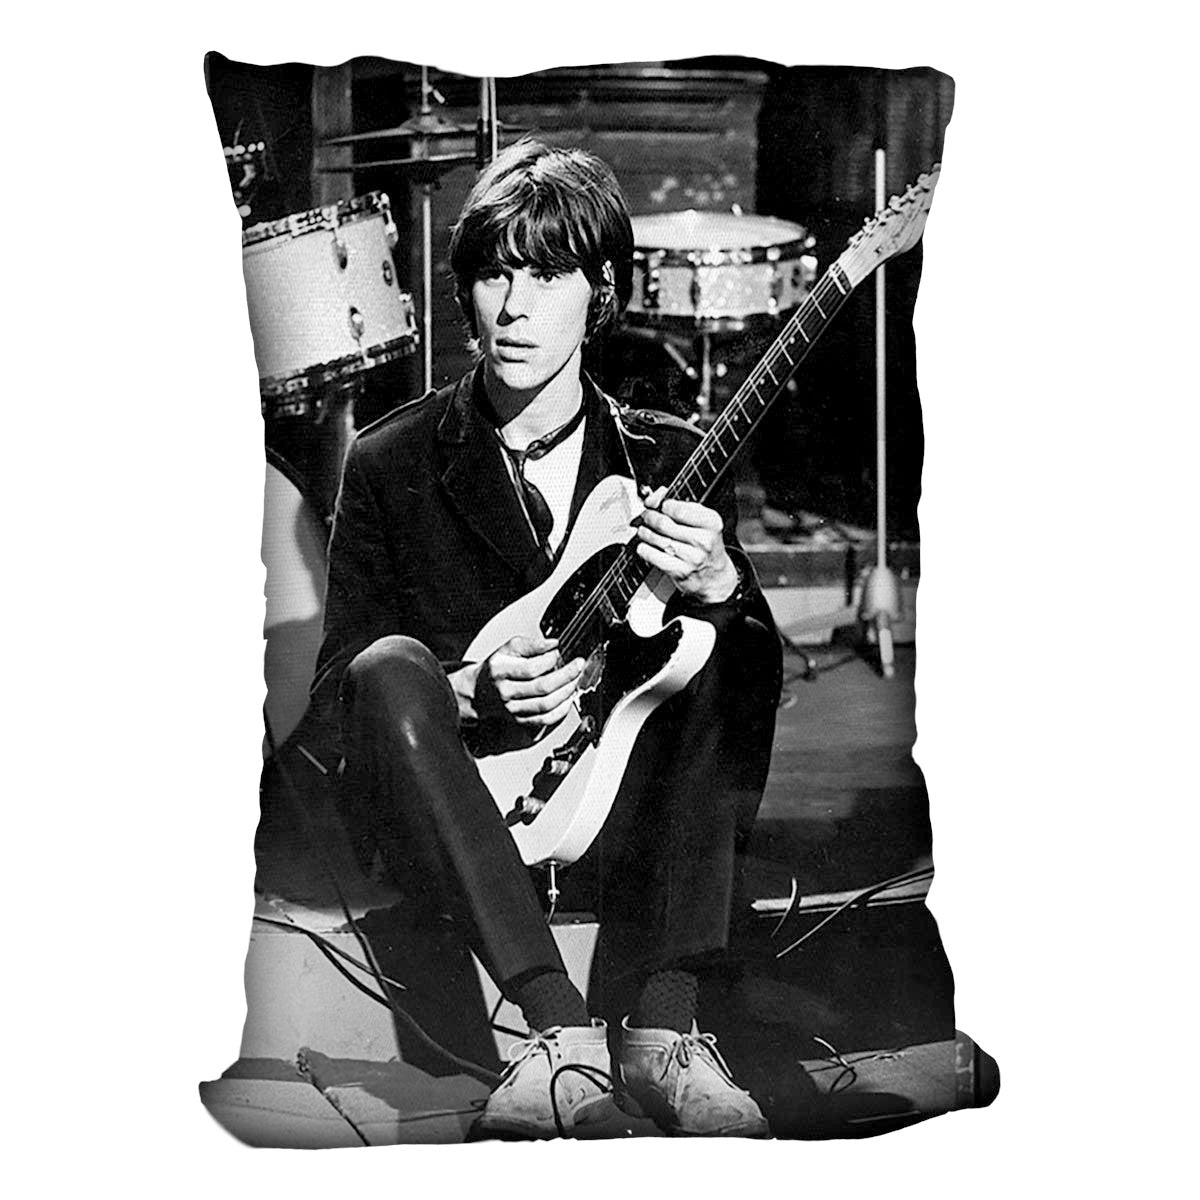 Jeff Beck in 1967 Cushion